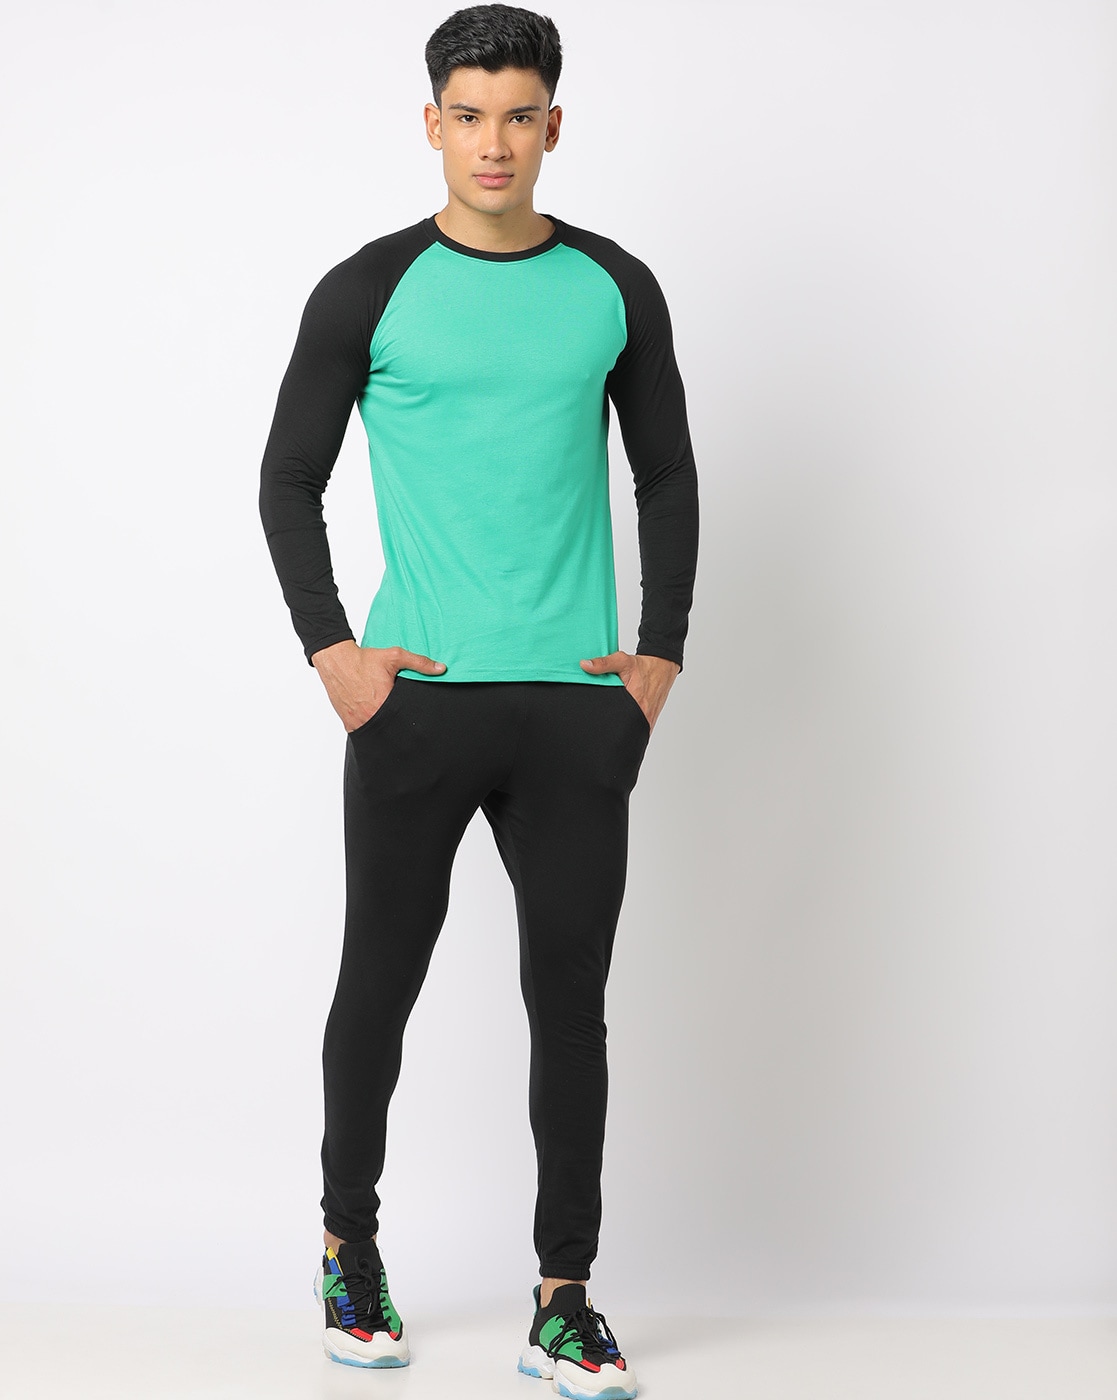 Attractive Young Indian Man Full Height Portrait In Black T Shirt Silver  Neck Chain In Green Park Stock Photo  Download Image Now  iStock